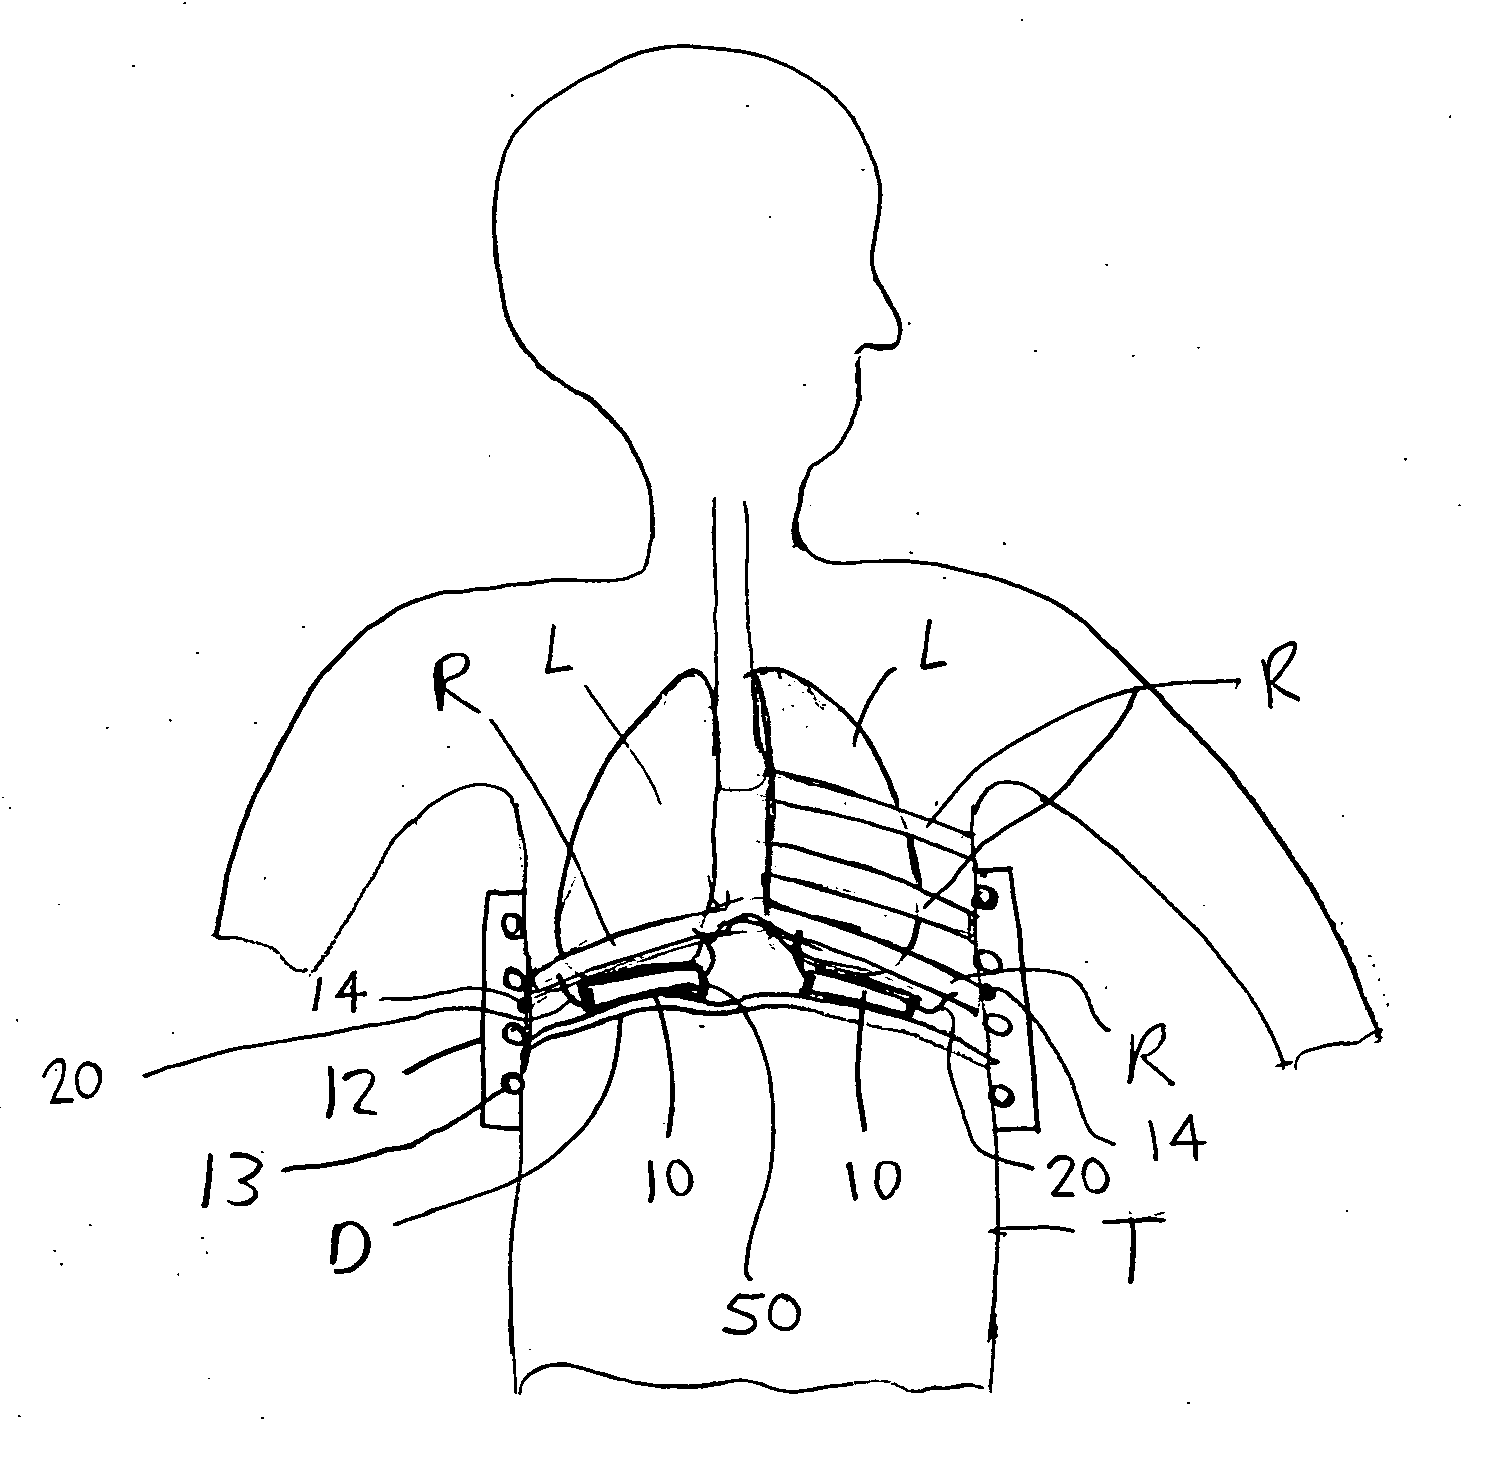 Electromagnetic diaphragm assist device and method for assisting a diaphragm function